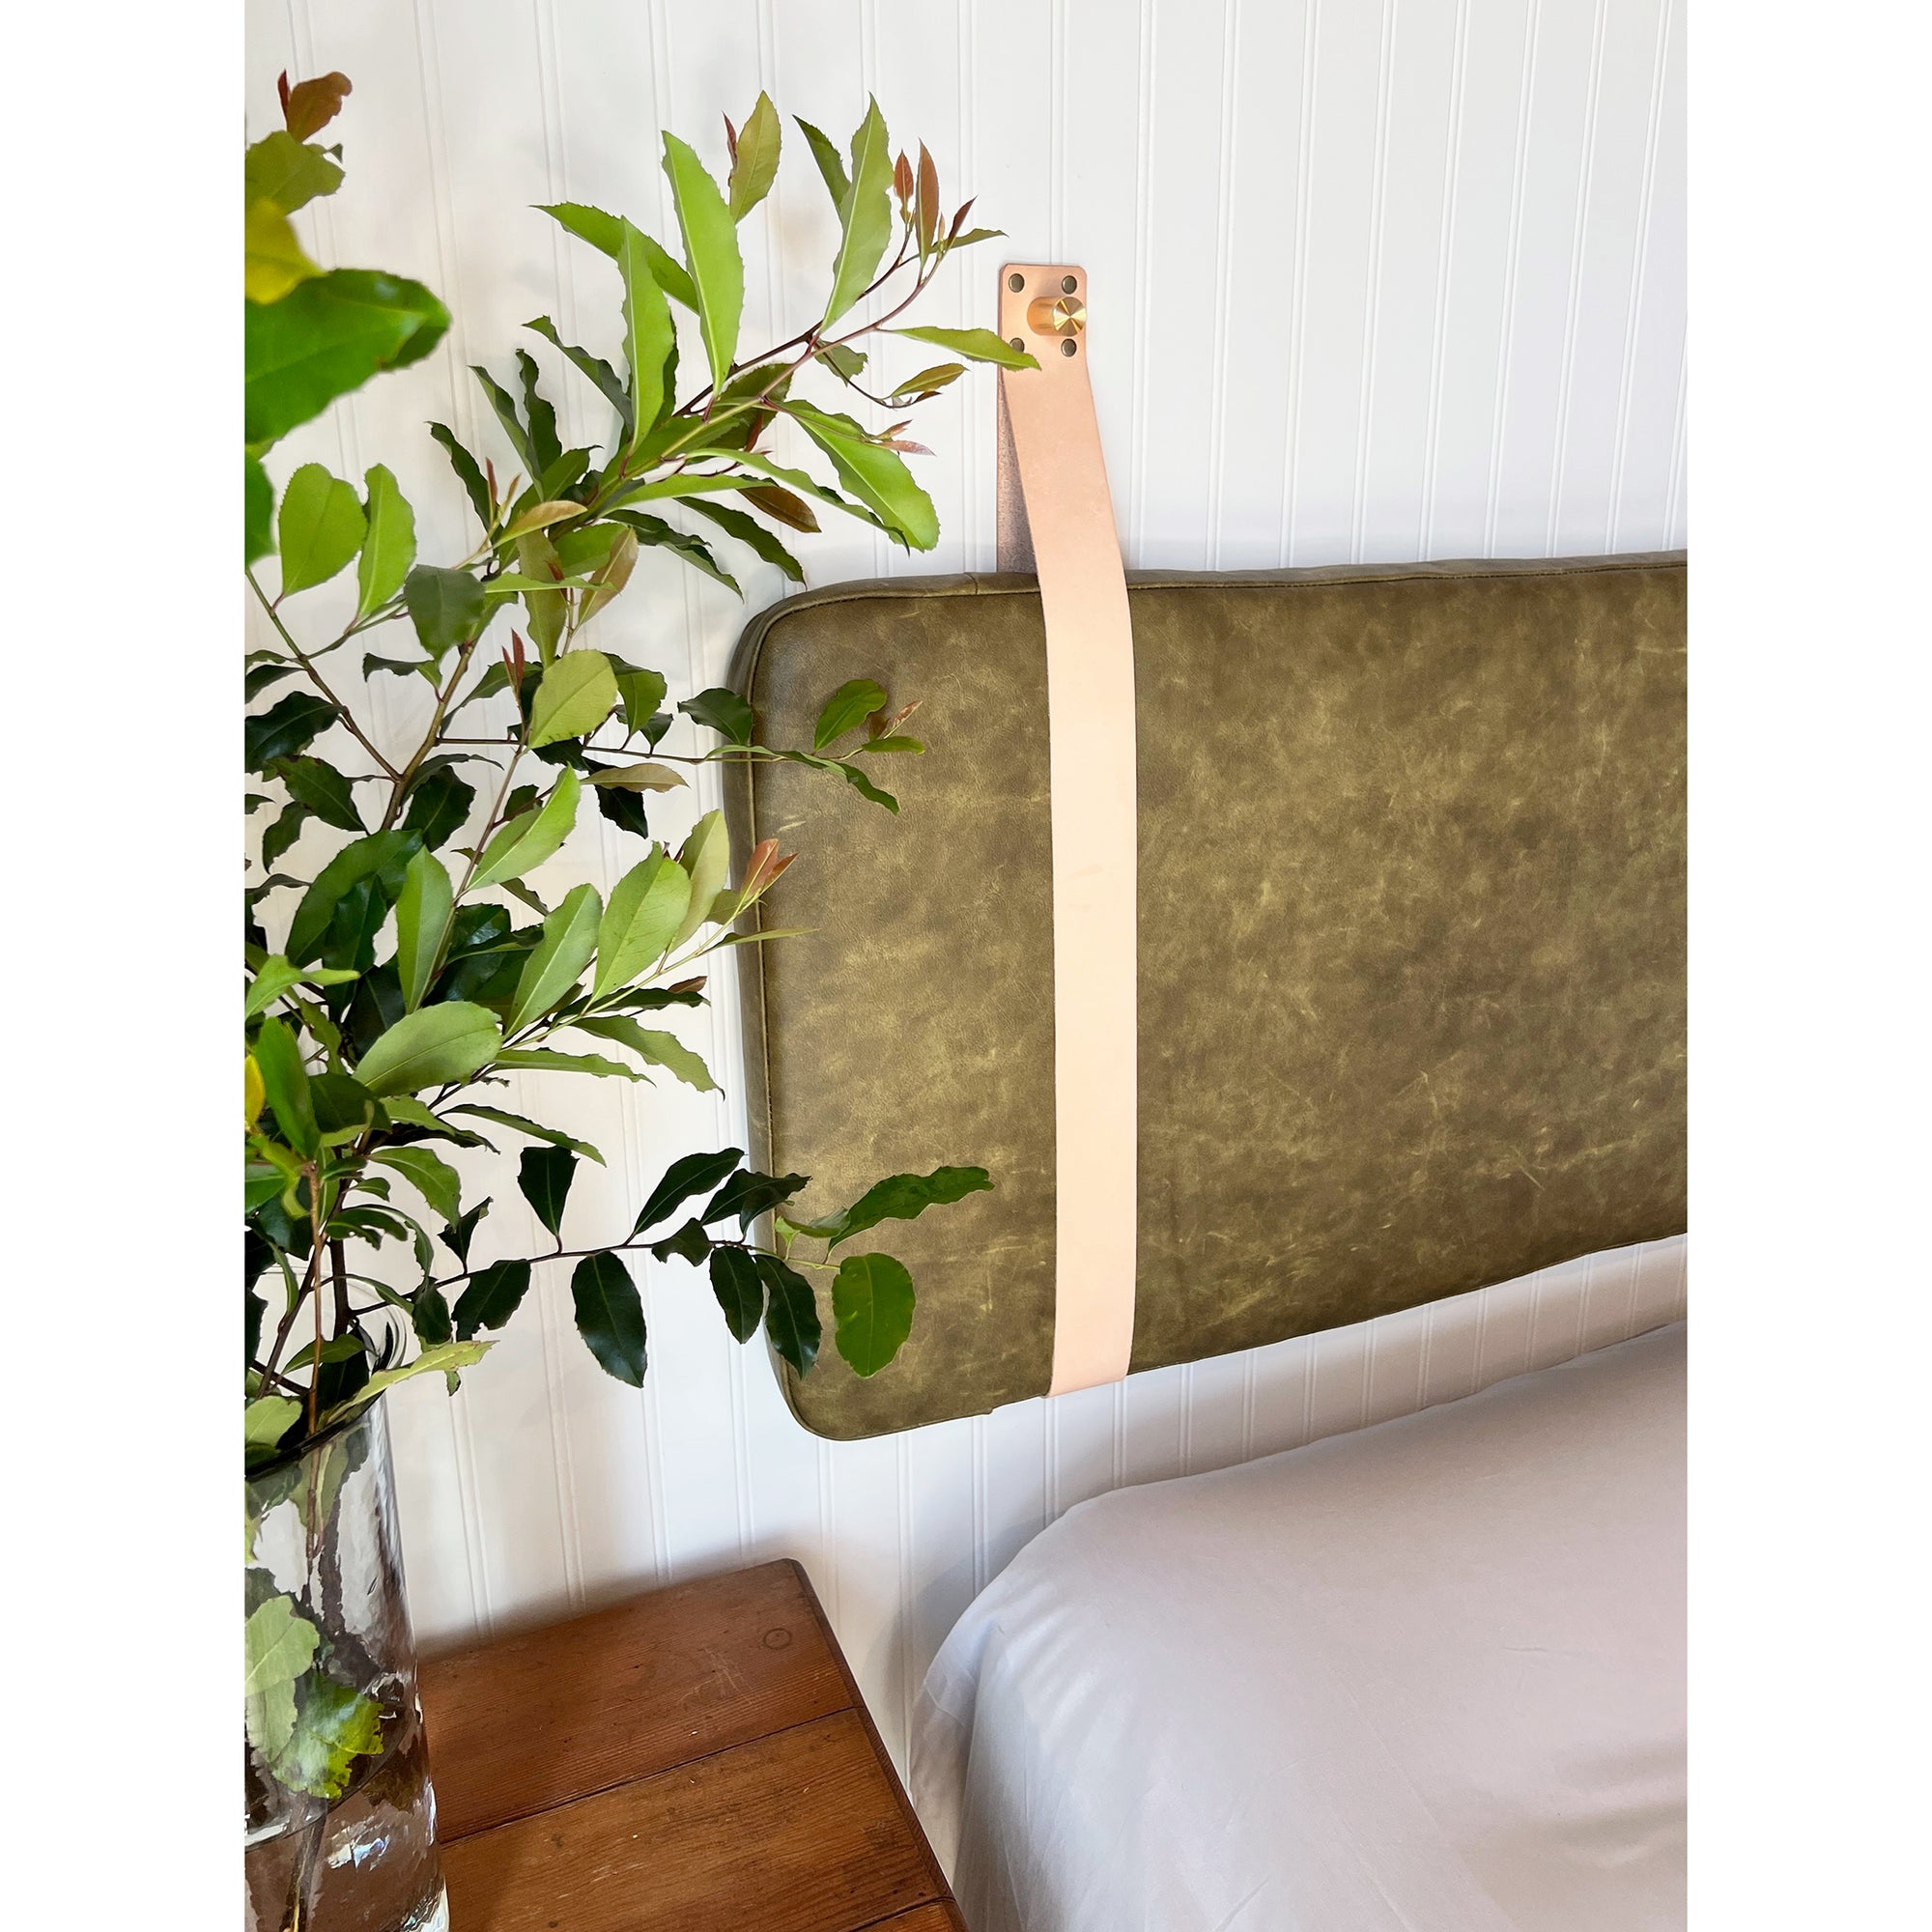 Olive Green Distressed Leather Headboard or Backrest Cushion with Straps